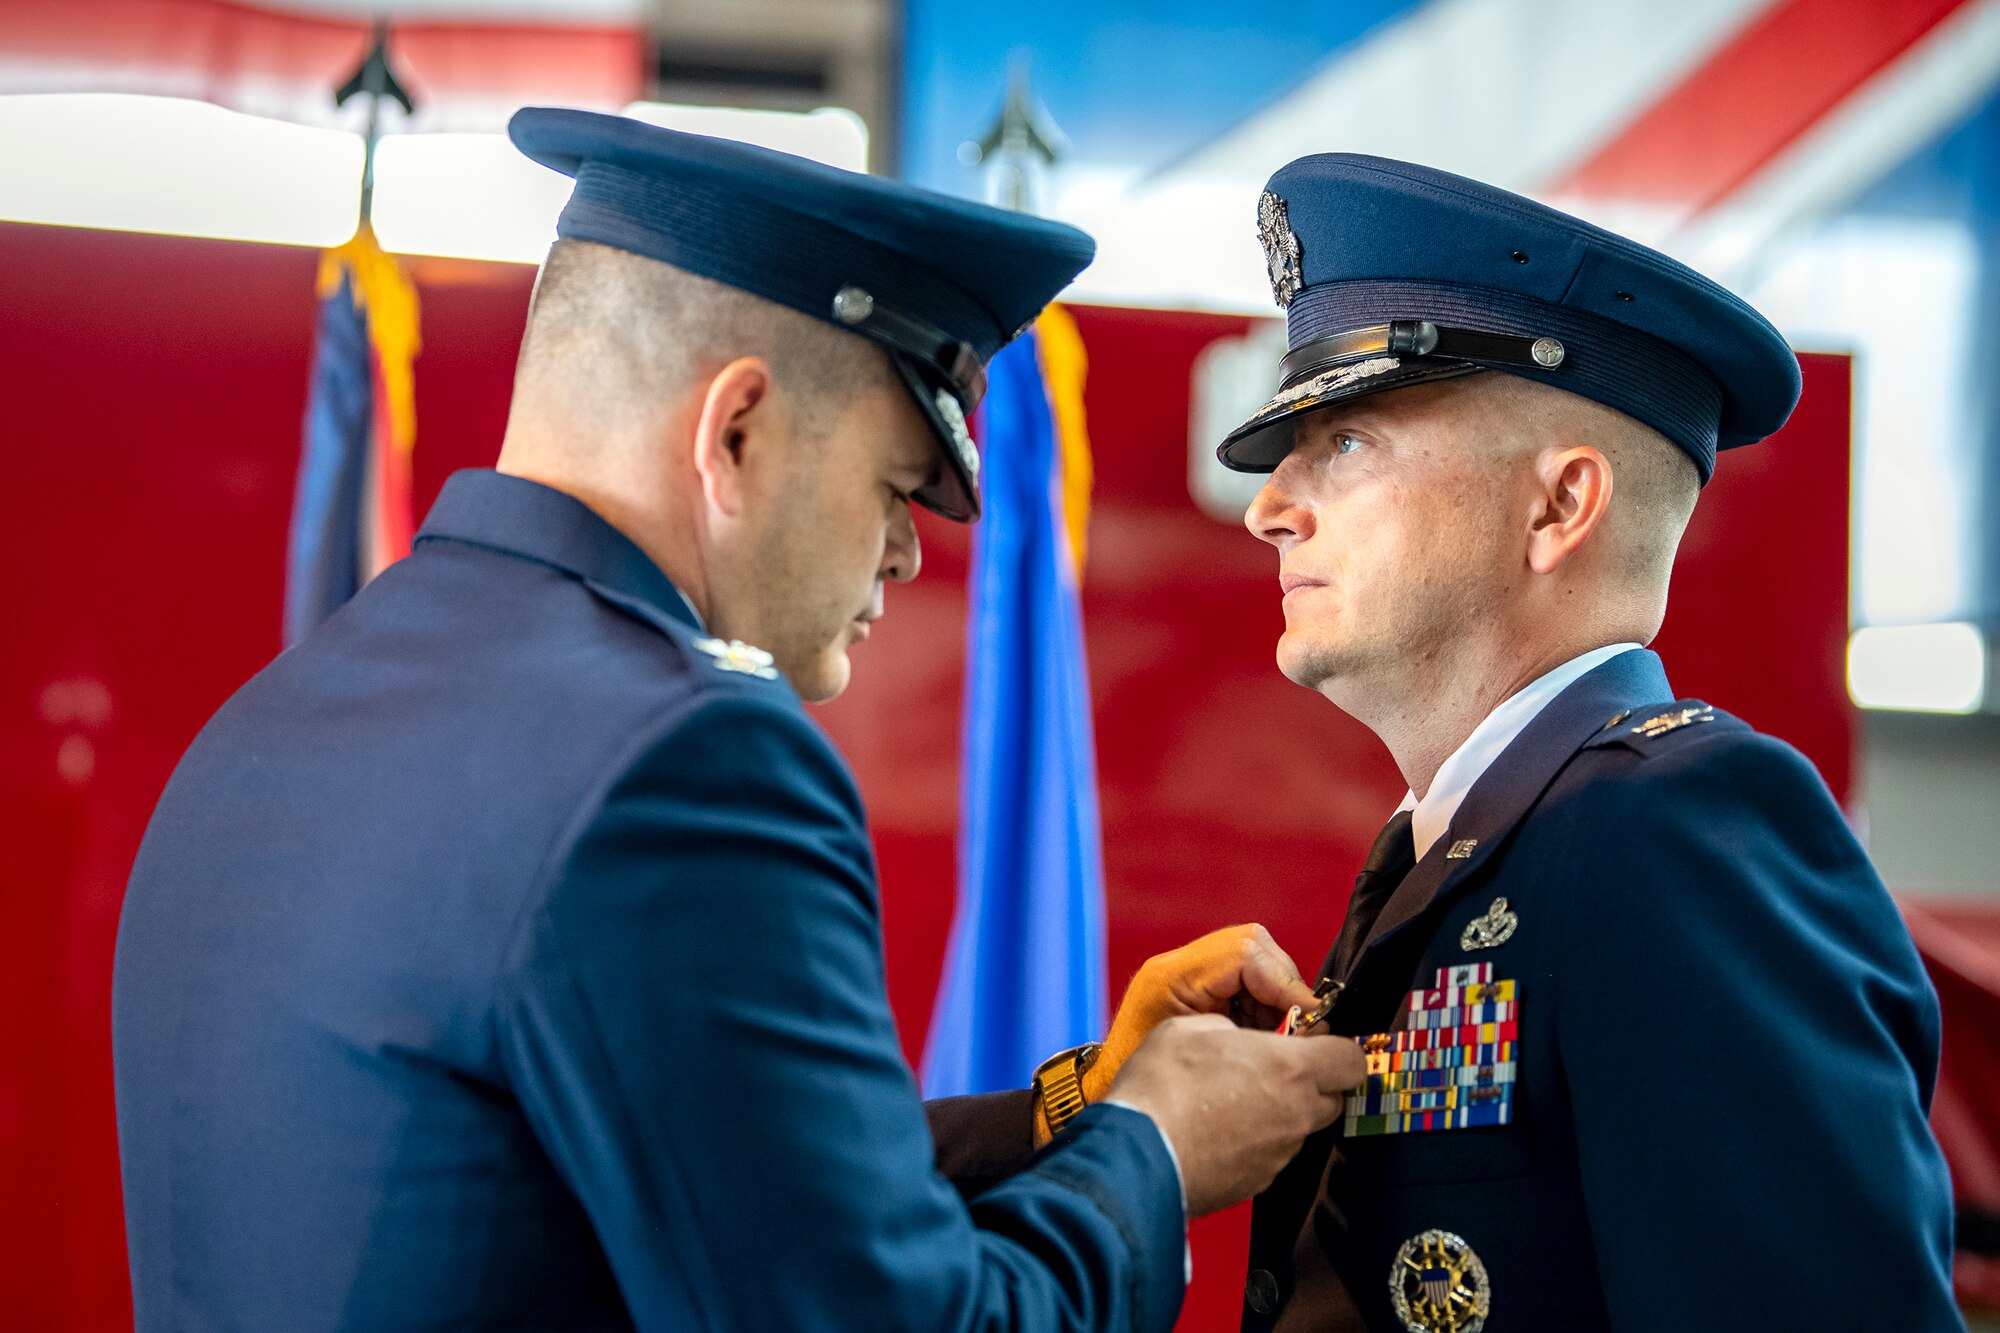 U.S. Air Force Col. Brian Filler, 501st Combat Support Wing commander, pins on the Legion of Merit medal to Col. Richard Martin, 423d Air Base Group outgoing commander, during a change of command ceremony at RAF Alconbury, England, July 25, 2022. During his command, Martin led a unit that provided a full range of operational, logistical, engineering, medical and communications support and community services to 6,500 military and civilian personnel and families at 4 installations. (U.S. Air Force photo by Staff Sgt. Eugene Oliver)